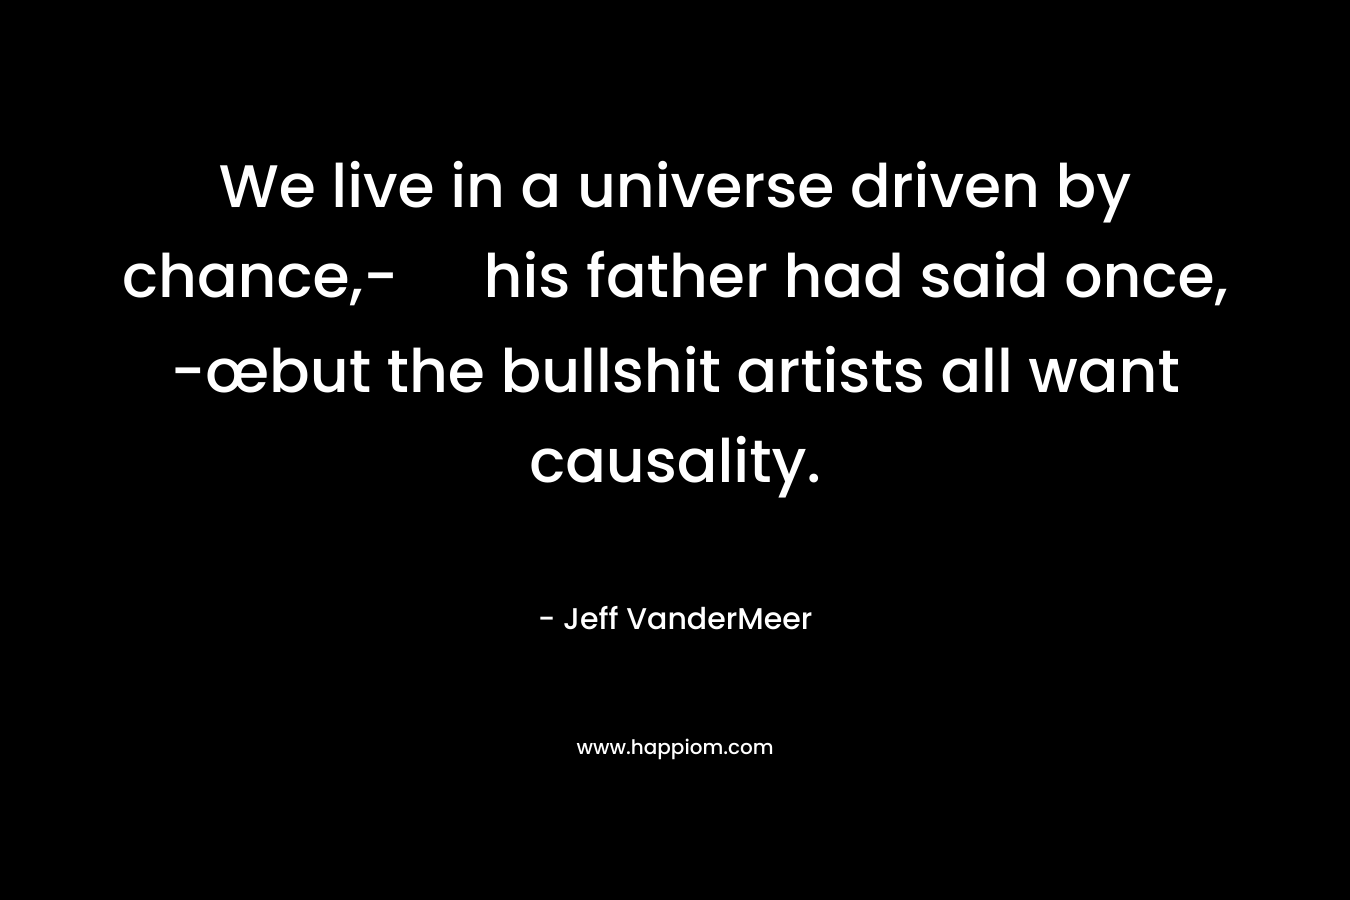 We live in a universe driven by chance,- his father had said once, -œbut the bullshit artists all want causality. – Jeff VanderMeer